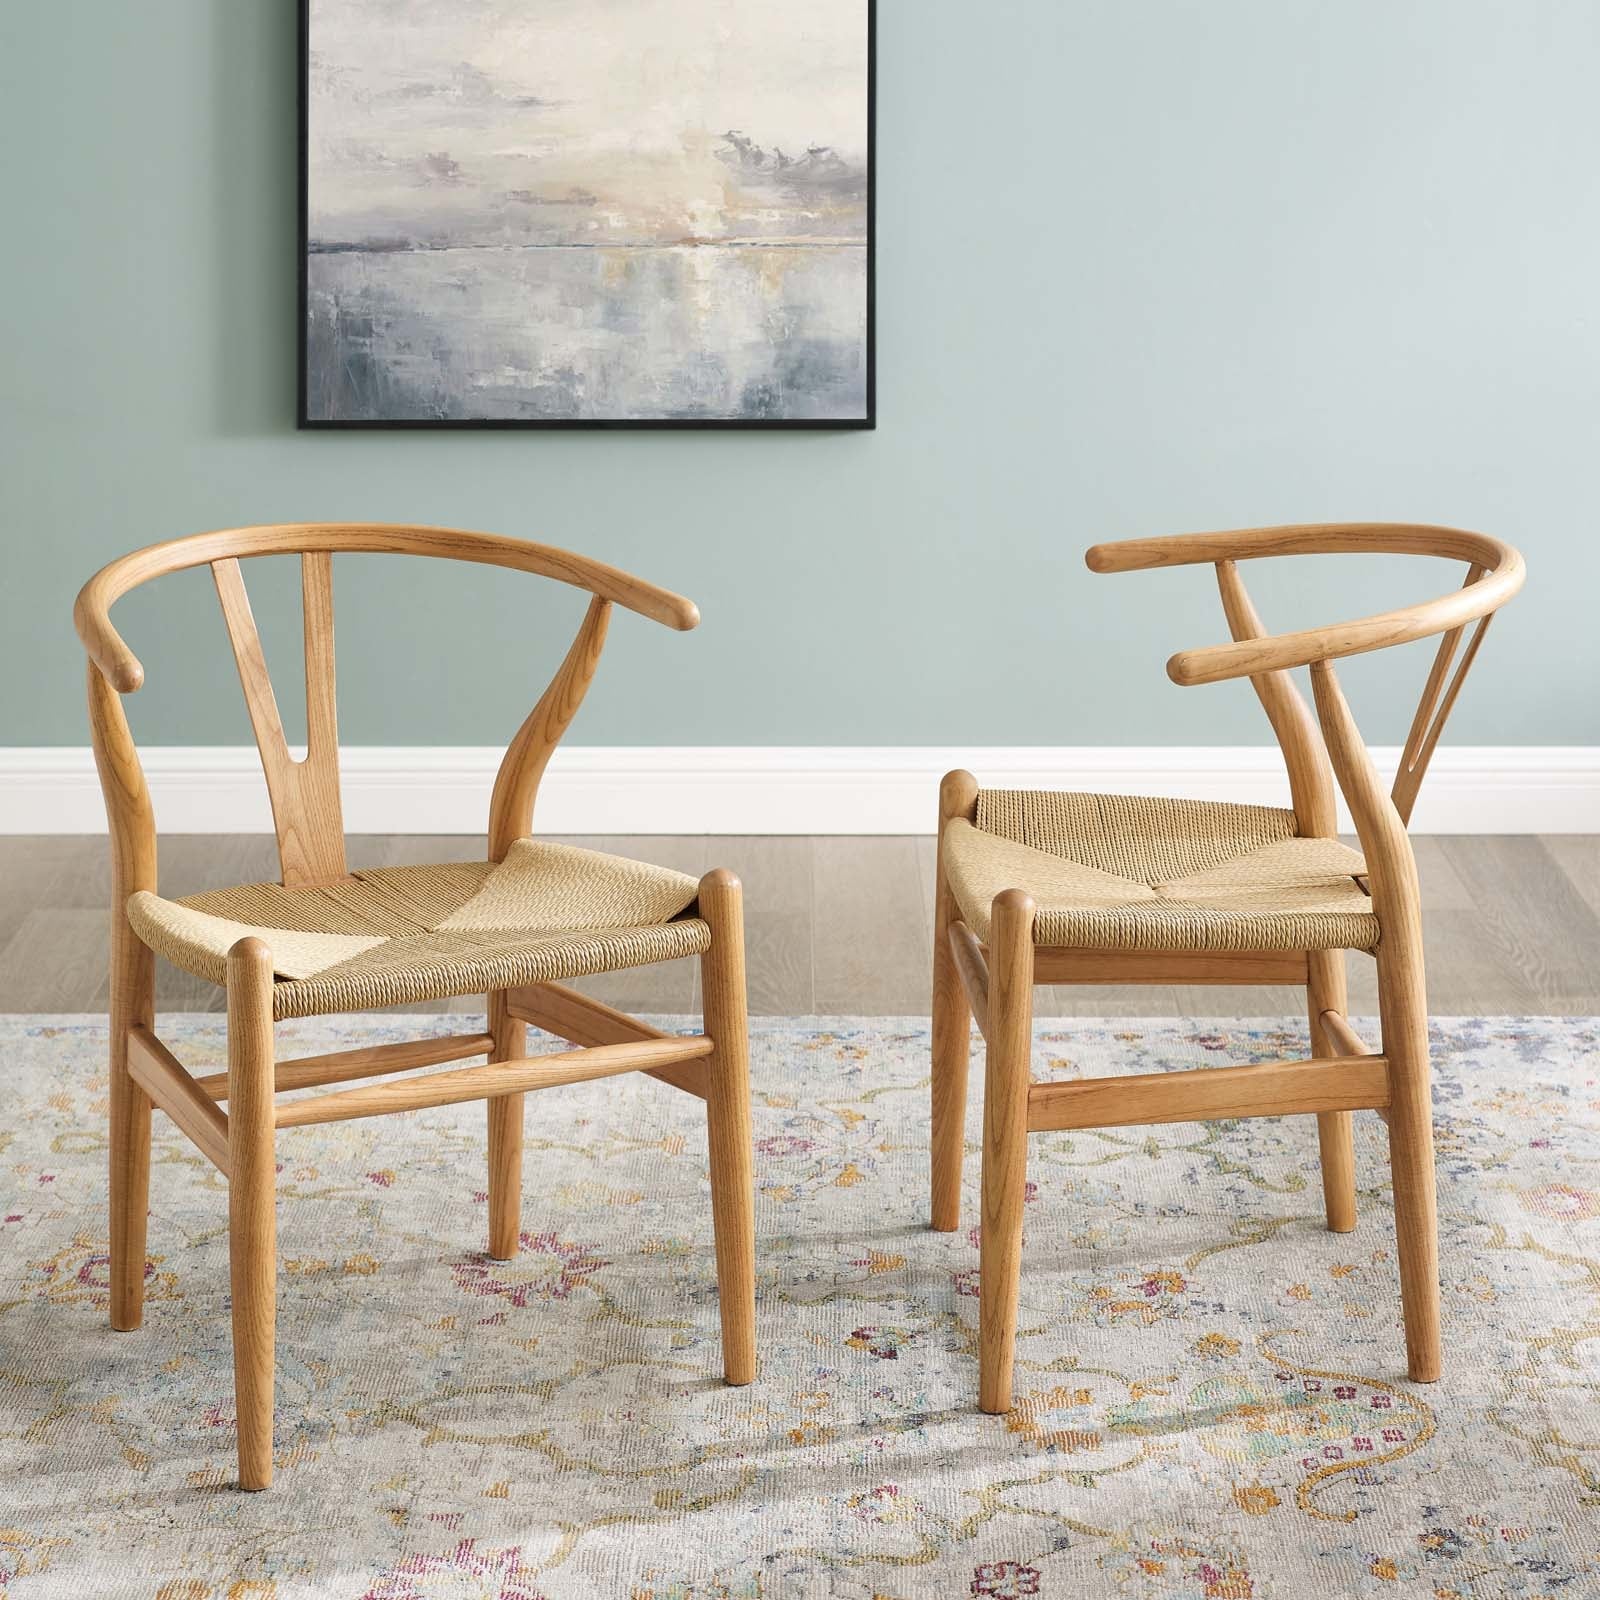 wassen ik ben verdwaald Zijn bekend The Curated Nomad Lumos Bamboo Wood and Rope Dining Chairs (Set of 2) - On  Sale - Bed Bath & Beyond - 30548208